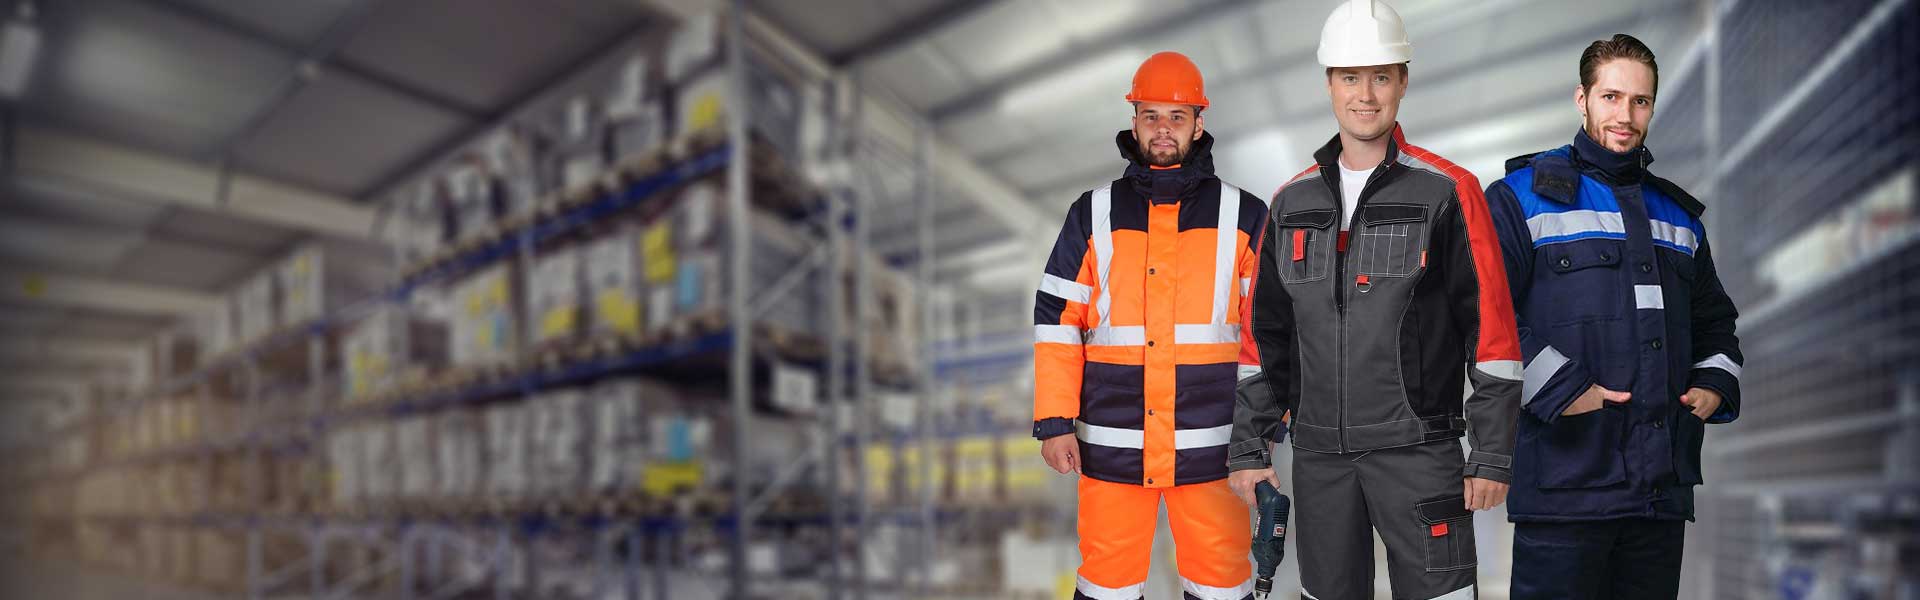 Workwear and personal protective equipment from the manufacturer!